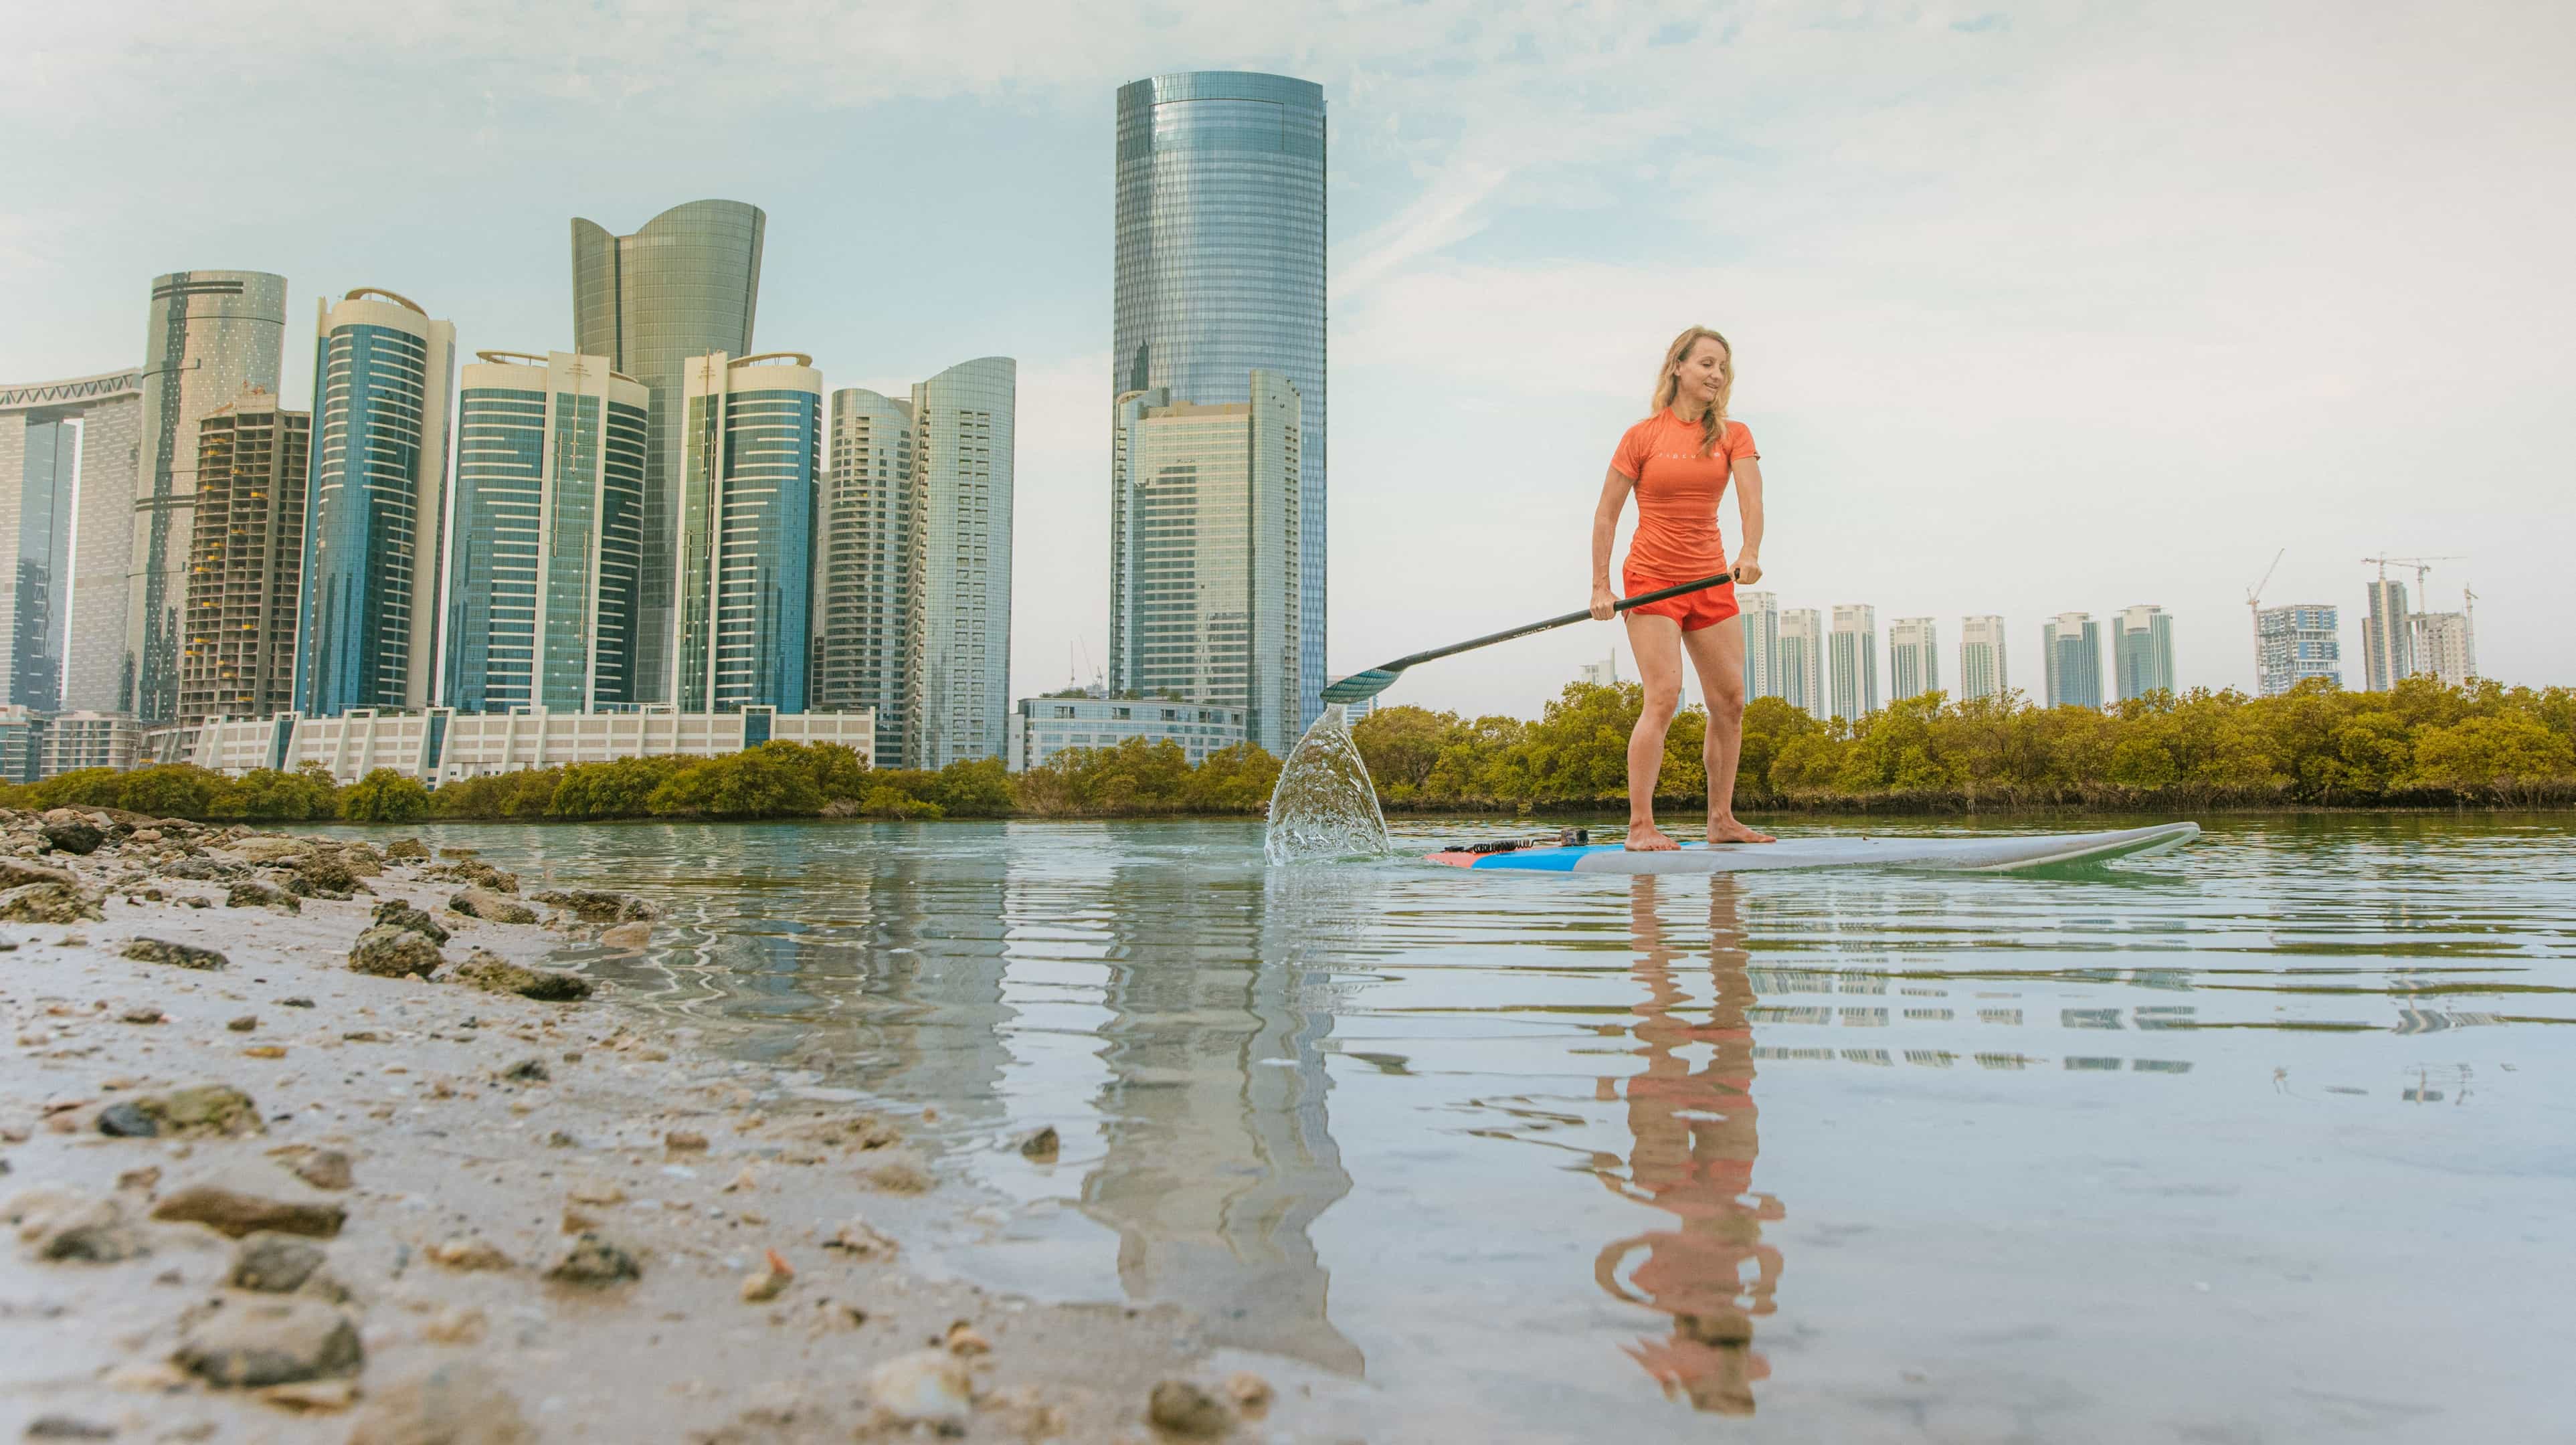 Stand-up paddle (SUP)